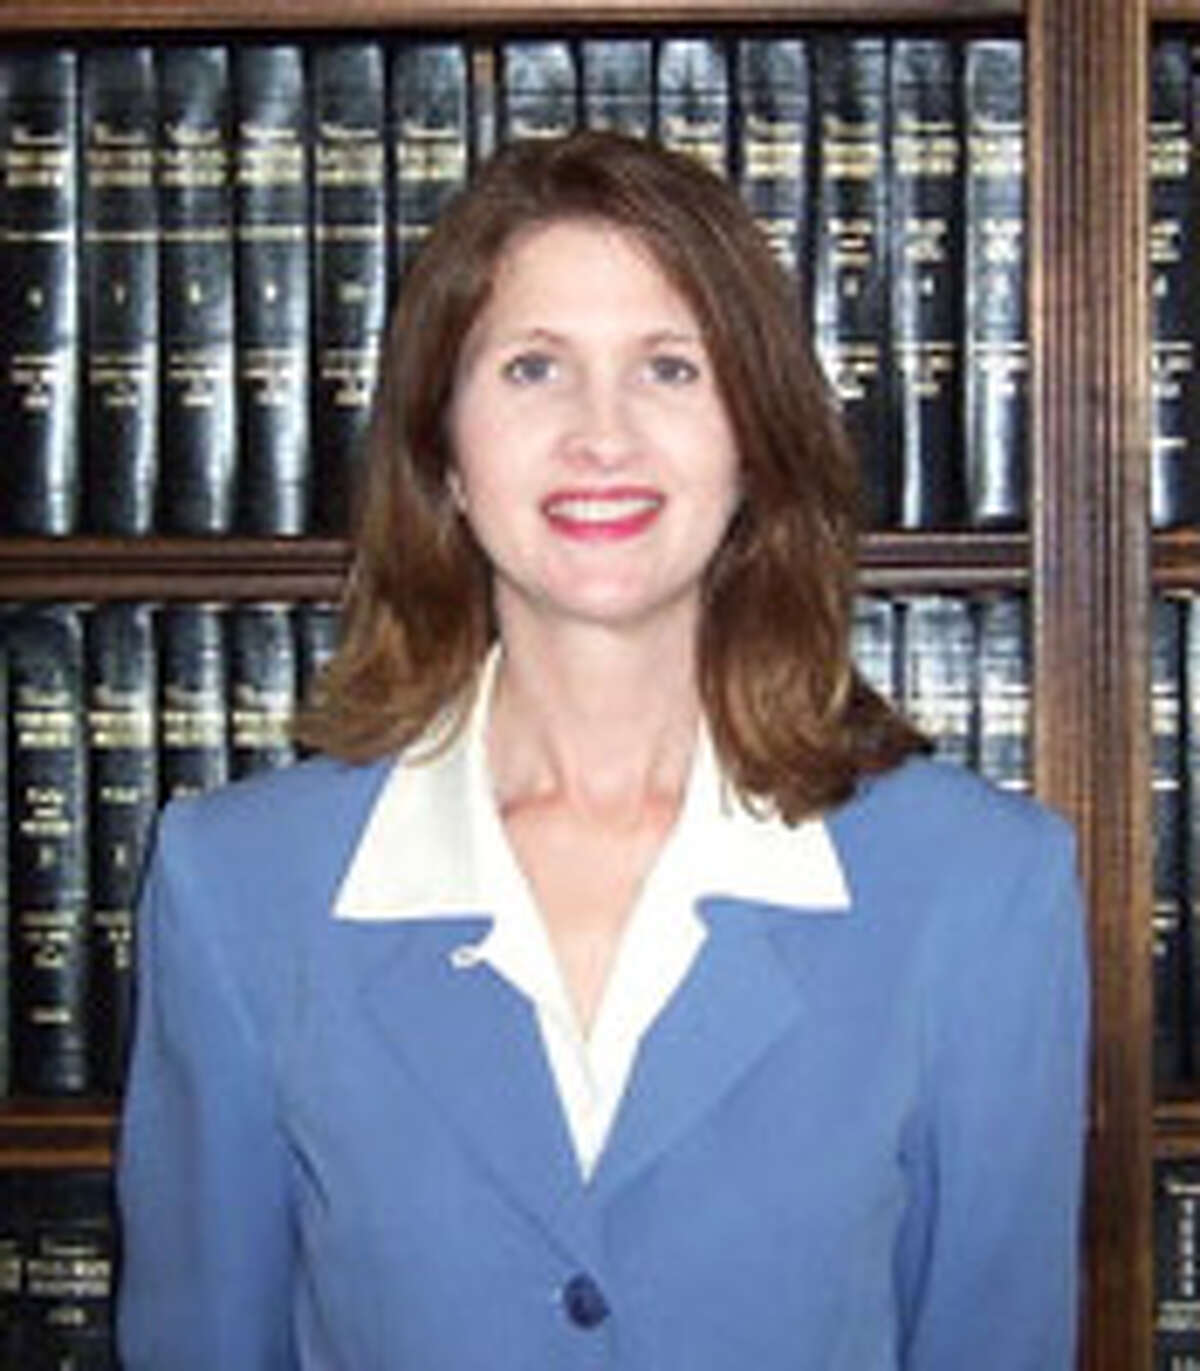 Caption: Judge Elizabeth E. Coker oversees the 258th district court that covers Polk, San Jacinto and Trinity counties. Coker is accused of the "very unethical" practice of sending text messages from the bench to an assistant district attorney to help bolster the prosecution's case during a trial, according to an investigator's report. Credit: Trinity County